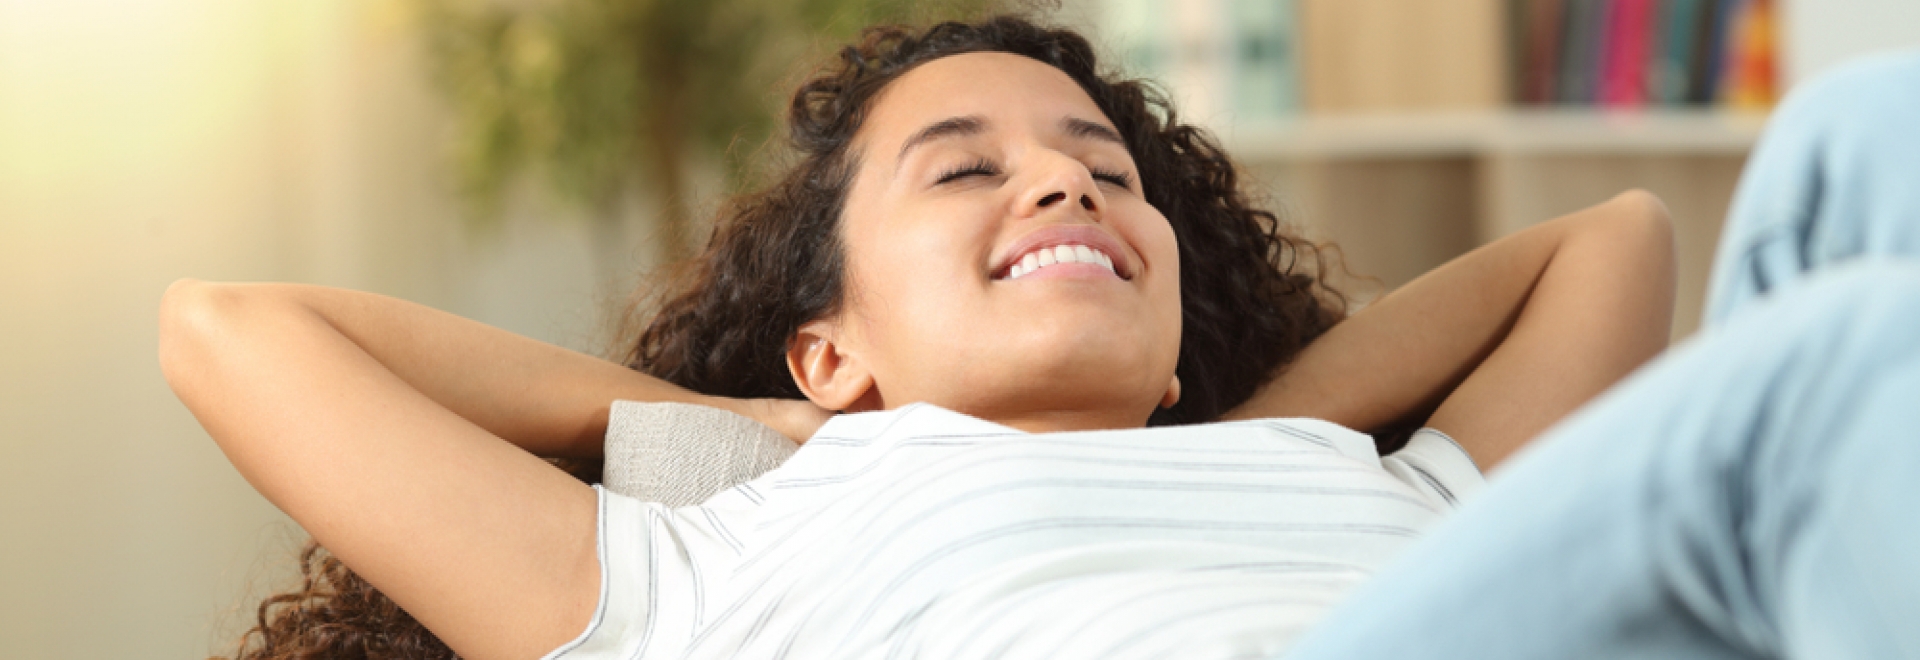 Woman Reclined on Couch Breathing In Fresh Air